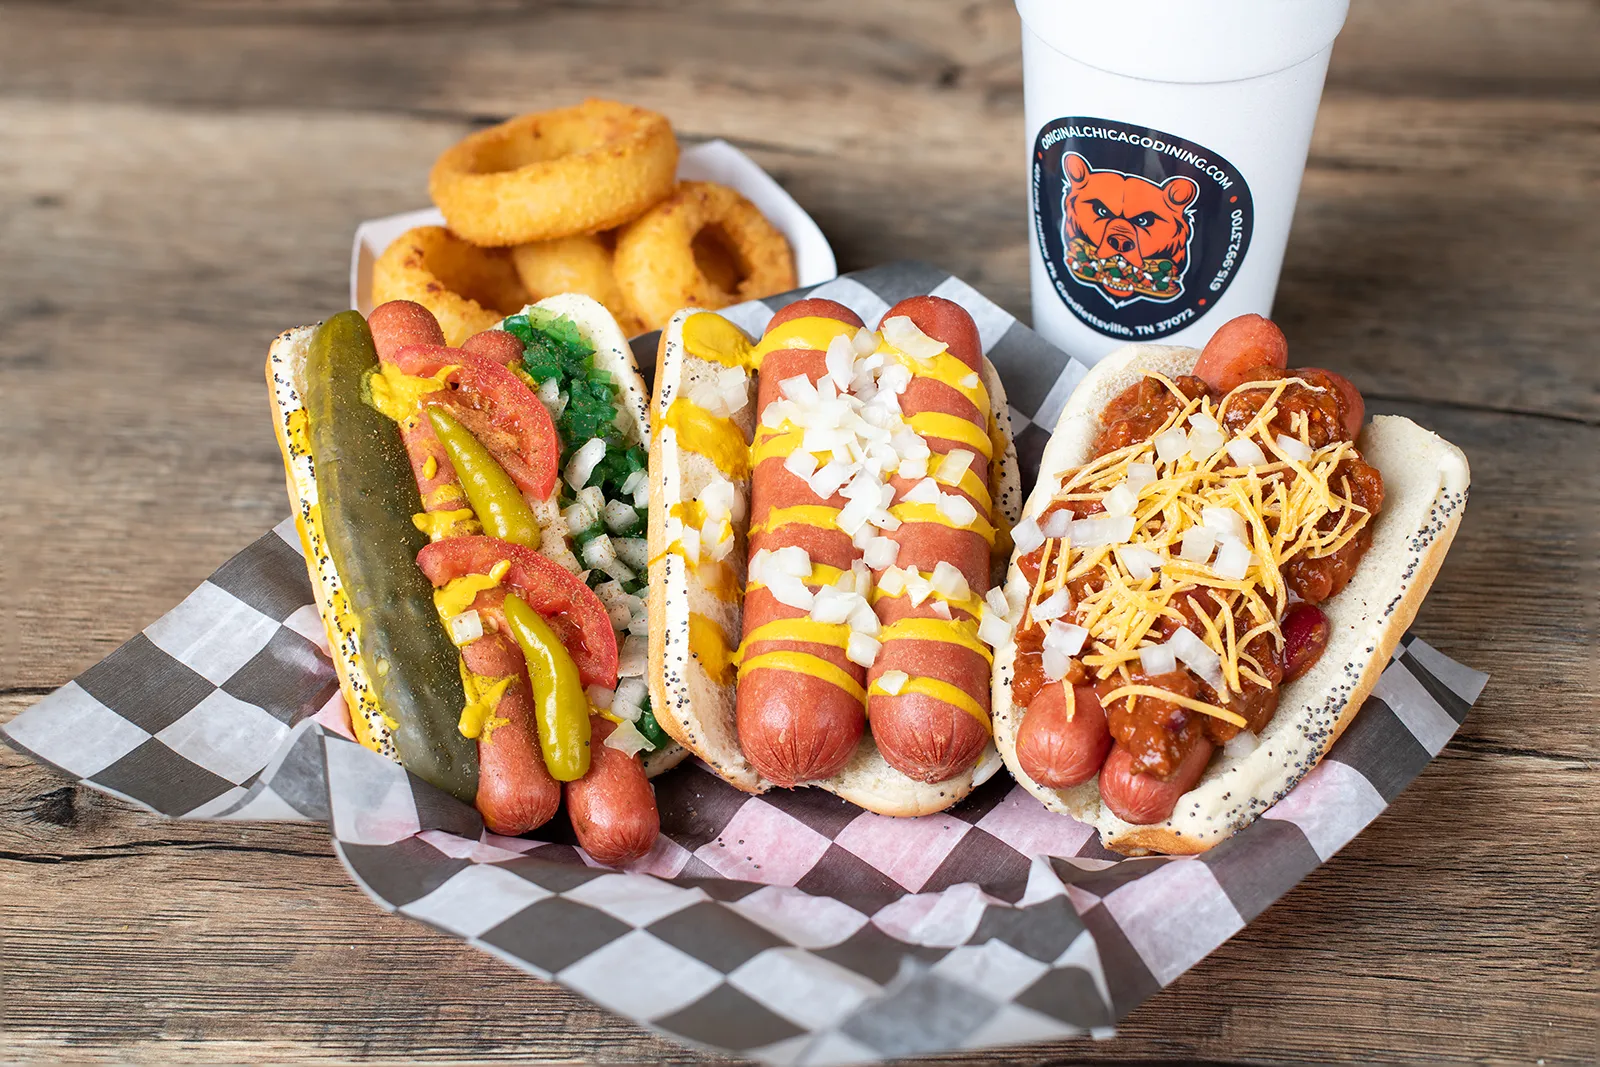 Staleys Double Dog hotdogs on a wooden background